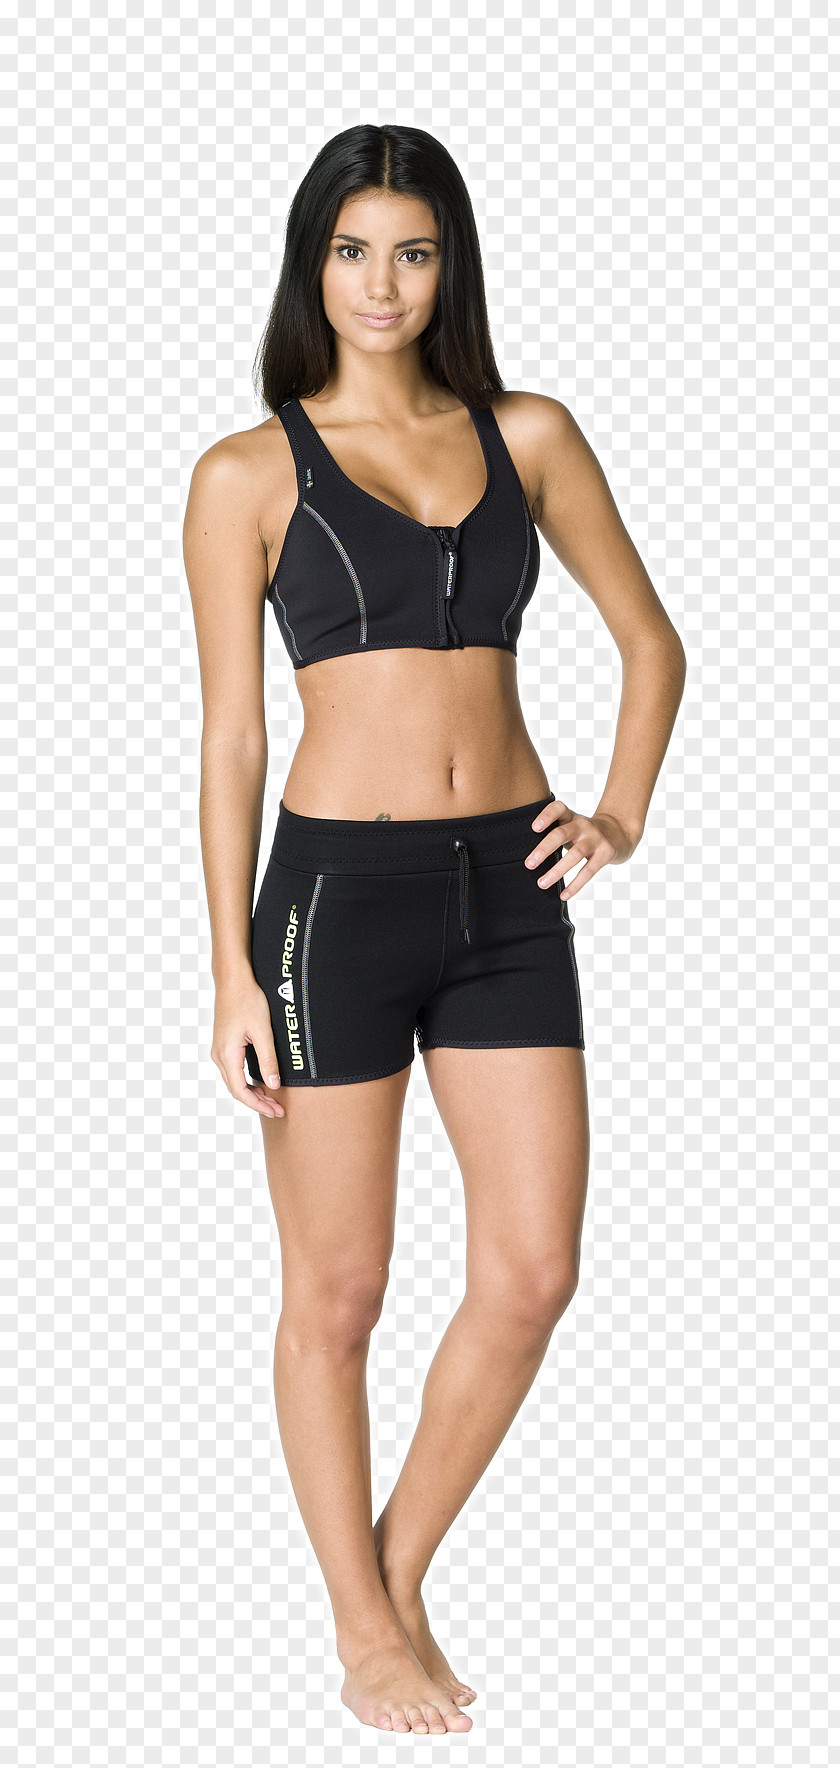 Suit Neoprene Wetsuit Shorts Clothing Top PNG